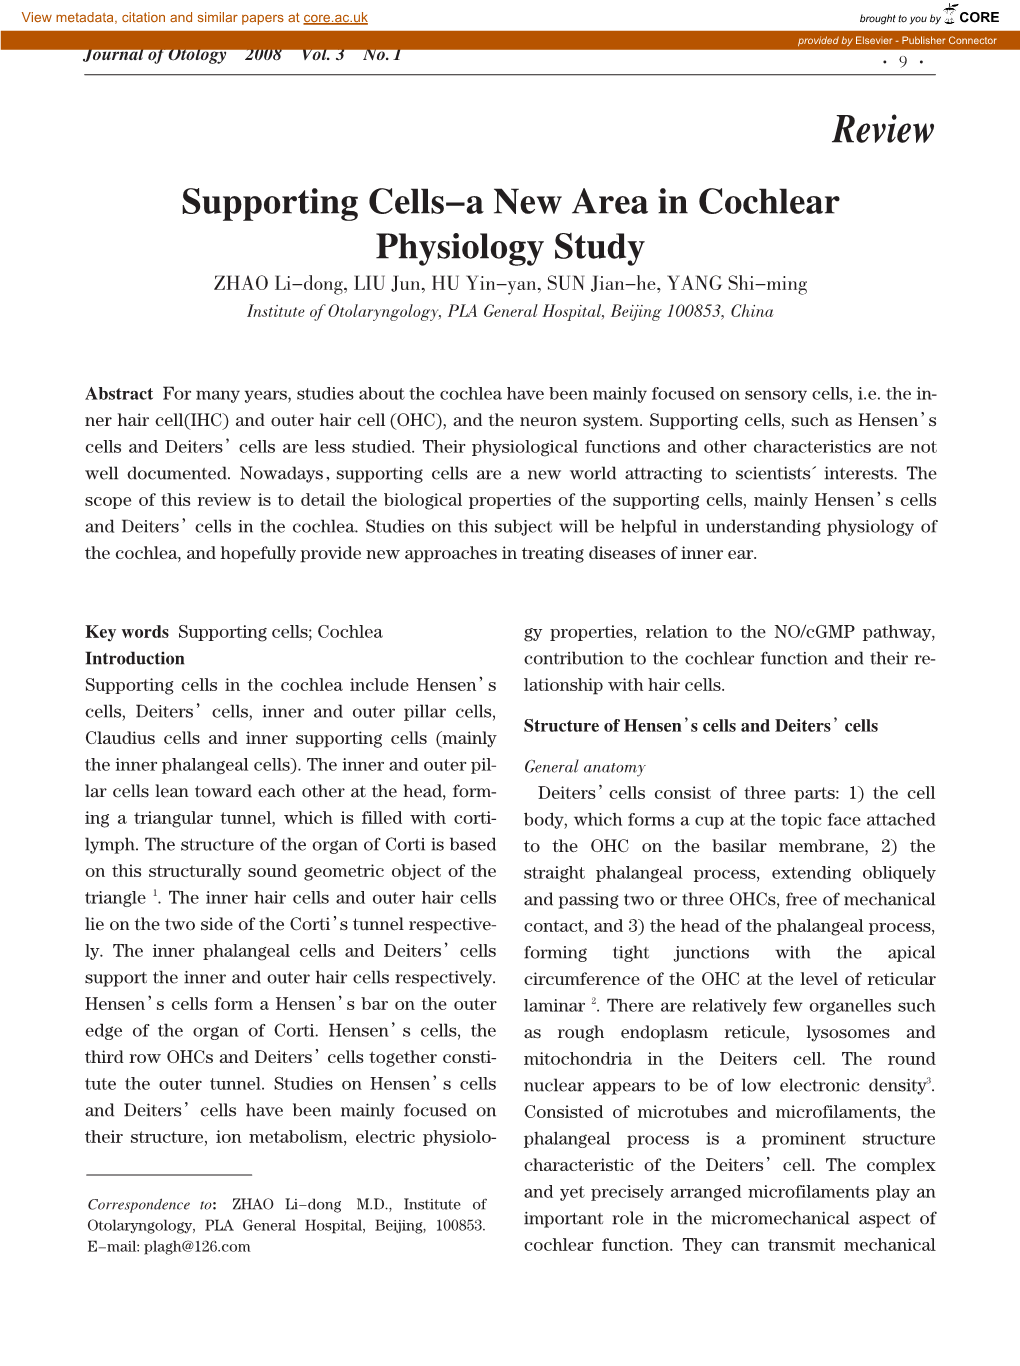 Supporting Cells–A New Area in Cochlear Physiology Study